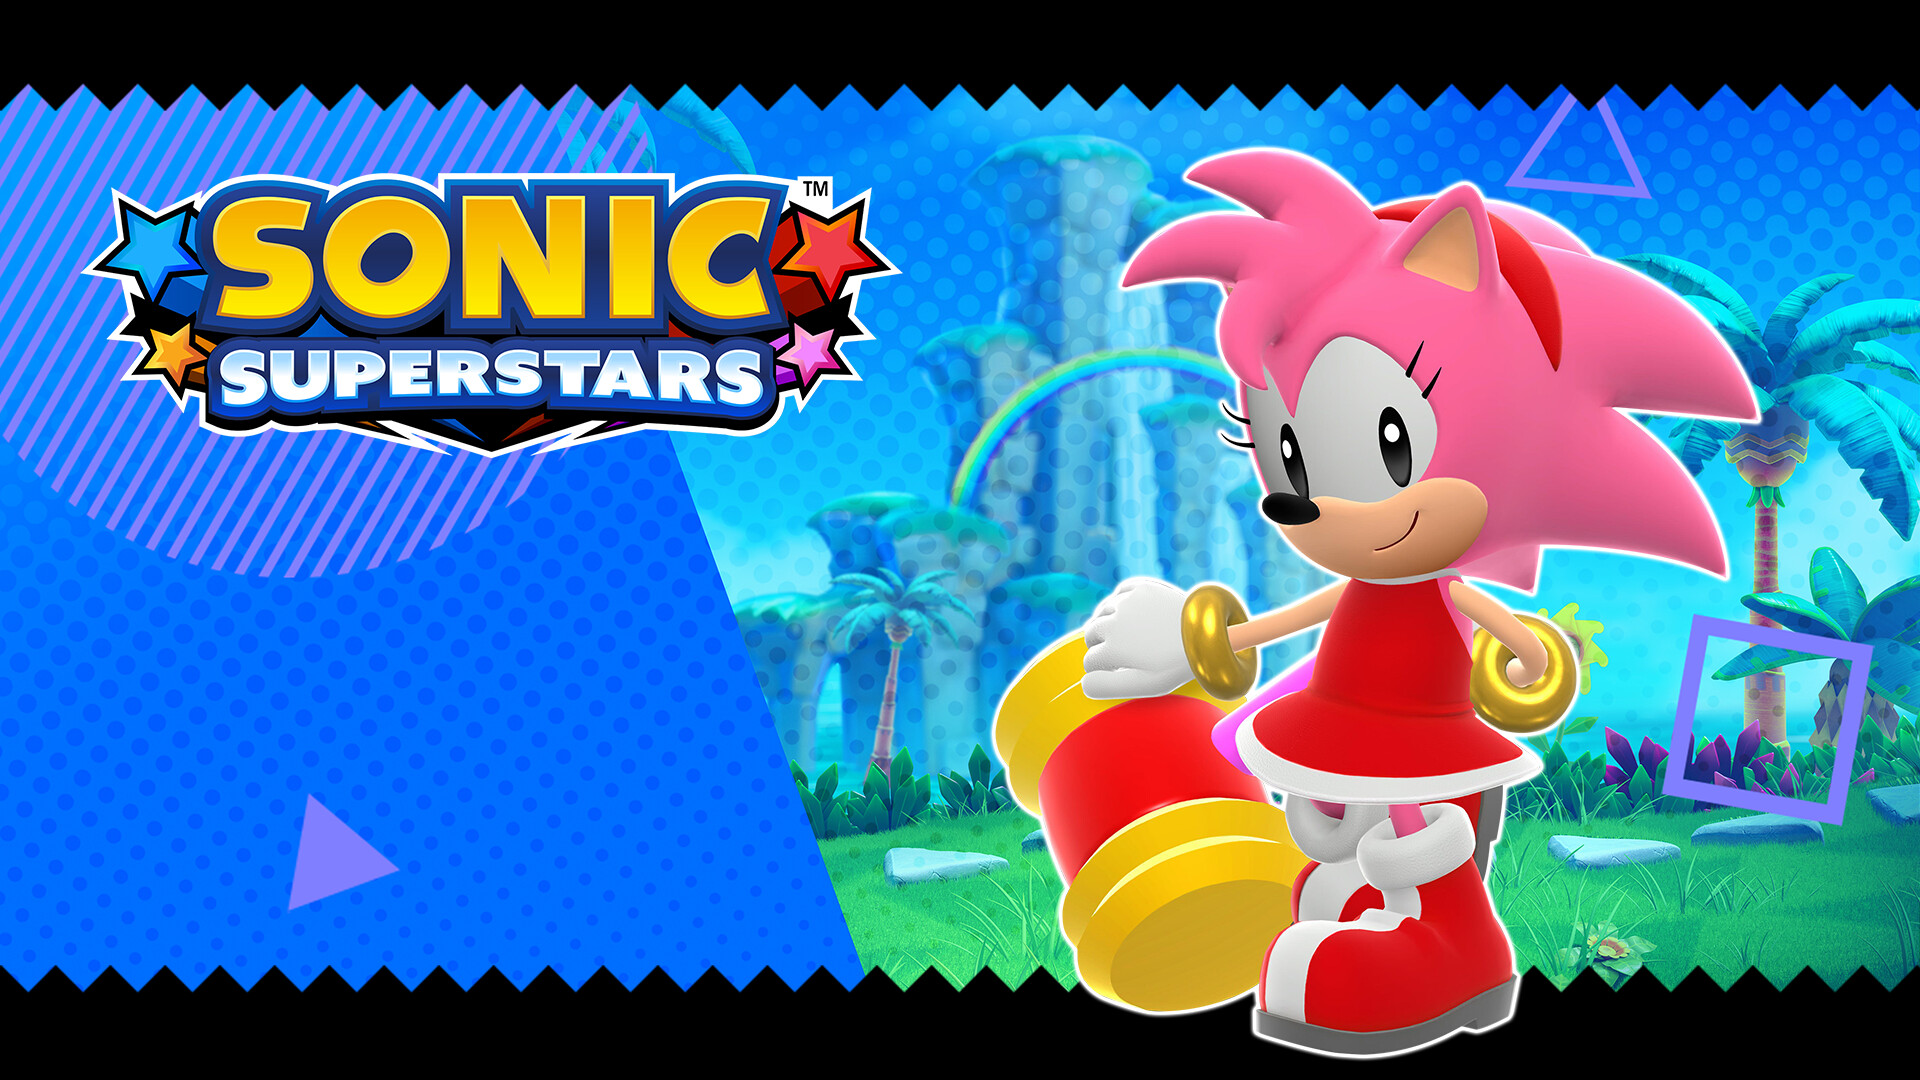 Sonic the Hedgehog - Amy Definitive Edition